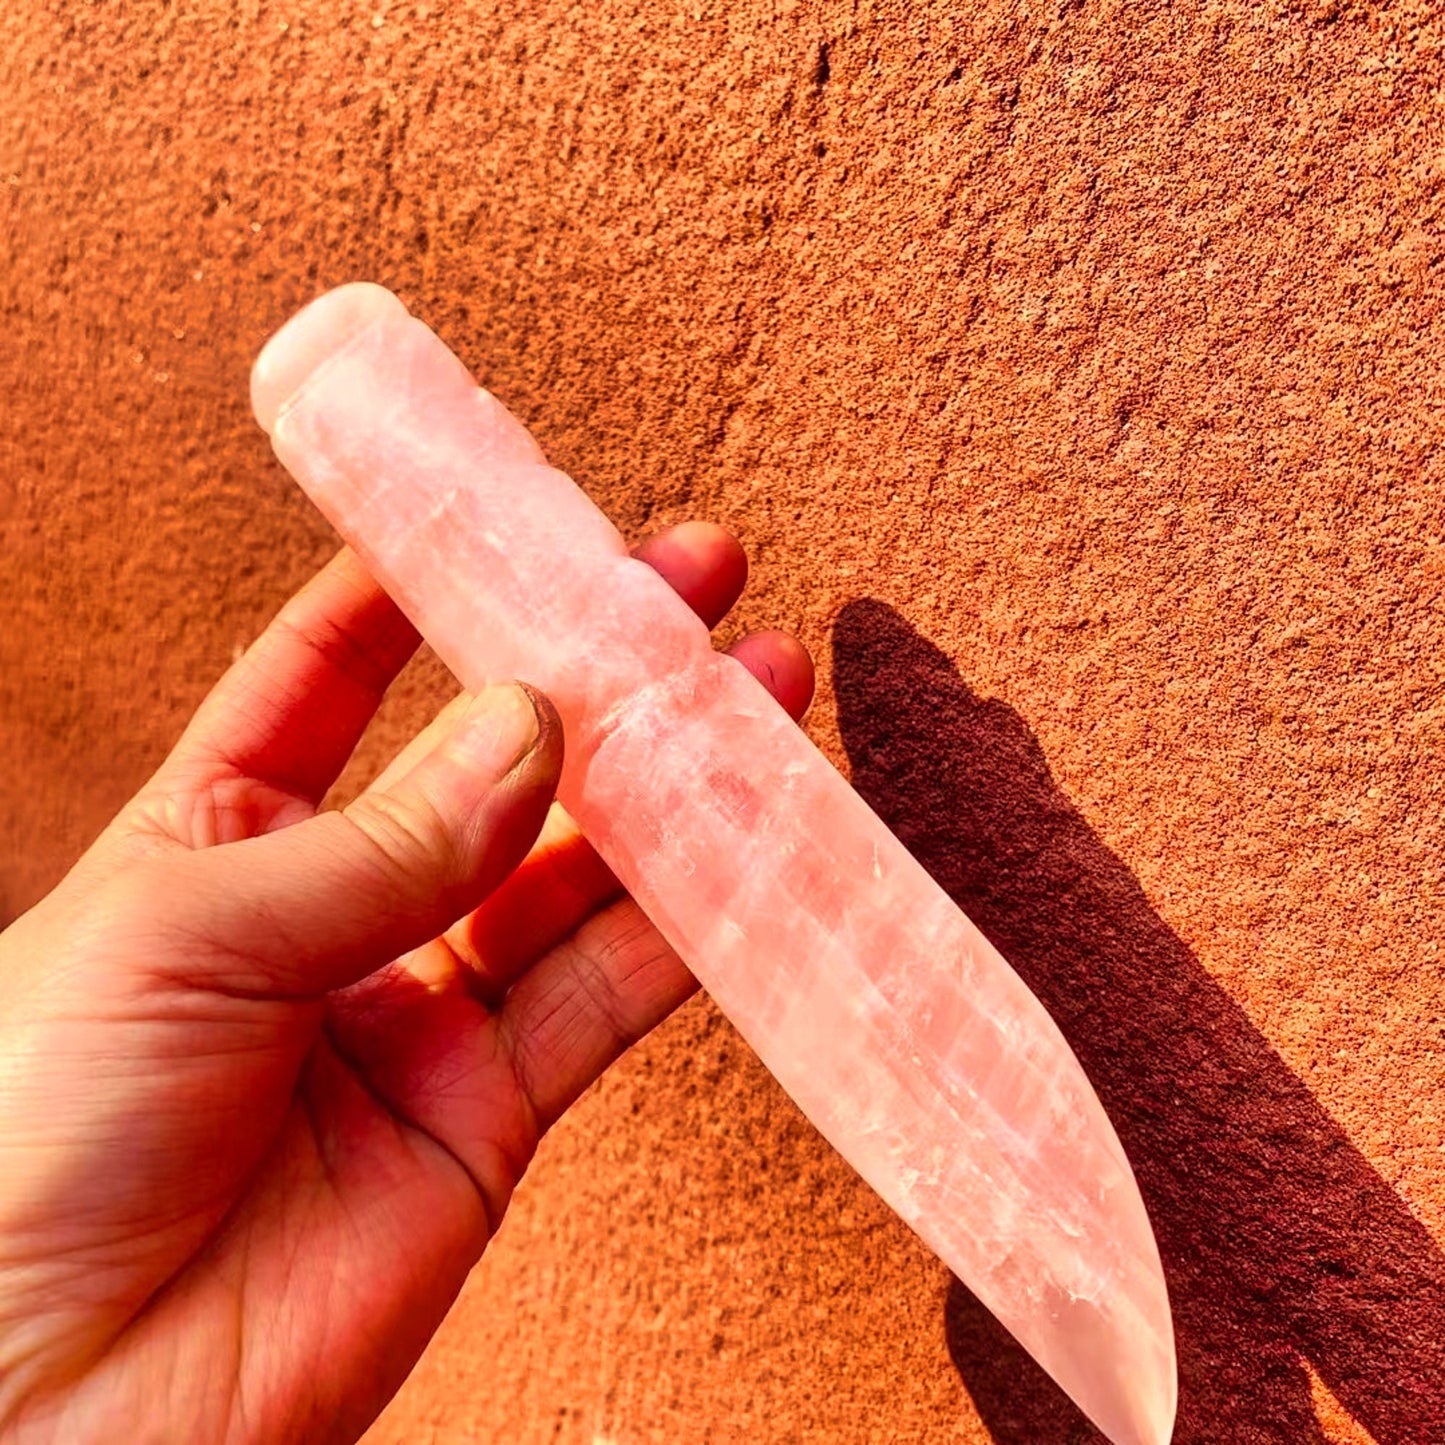 Handmade 150mm Natural Pink Rose Quartz Crystal Dagger for Healing, Protection, and Witchcraft - Men's Gift and Magic Talisman Sword